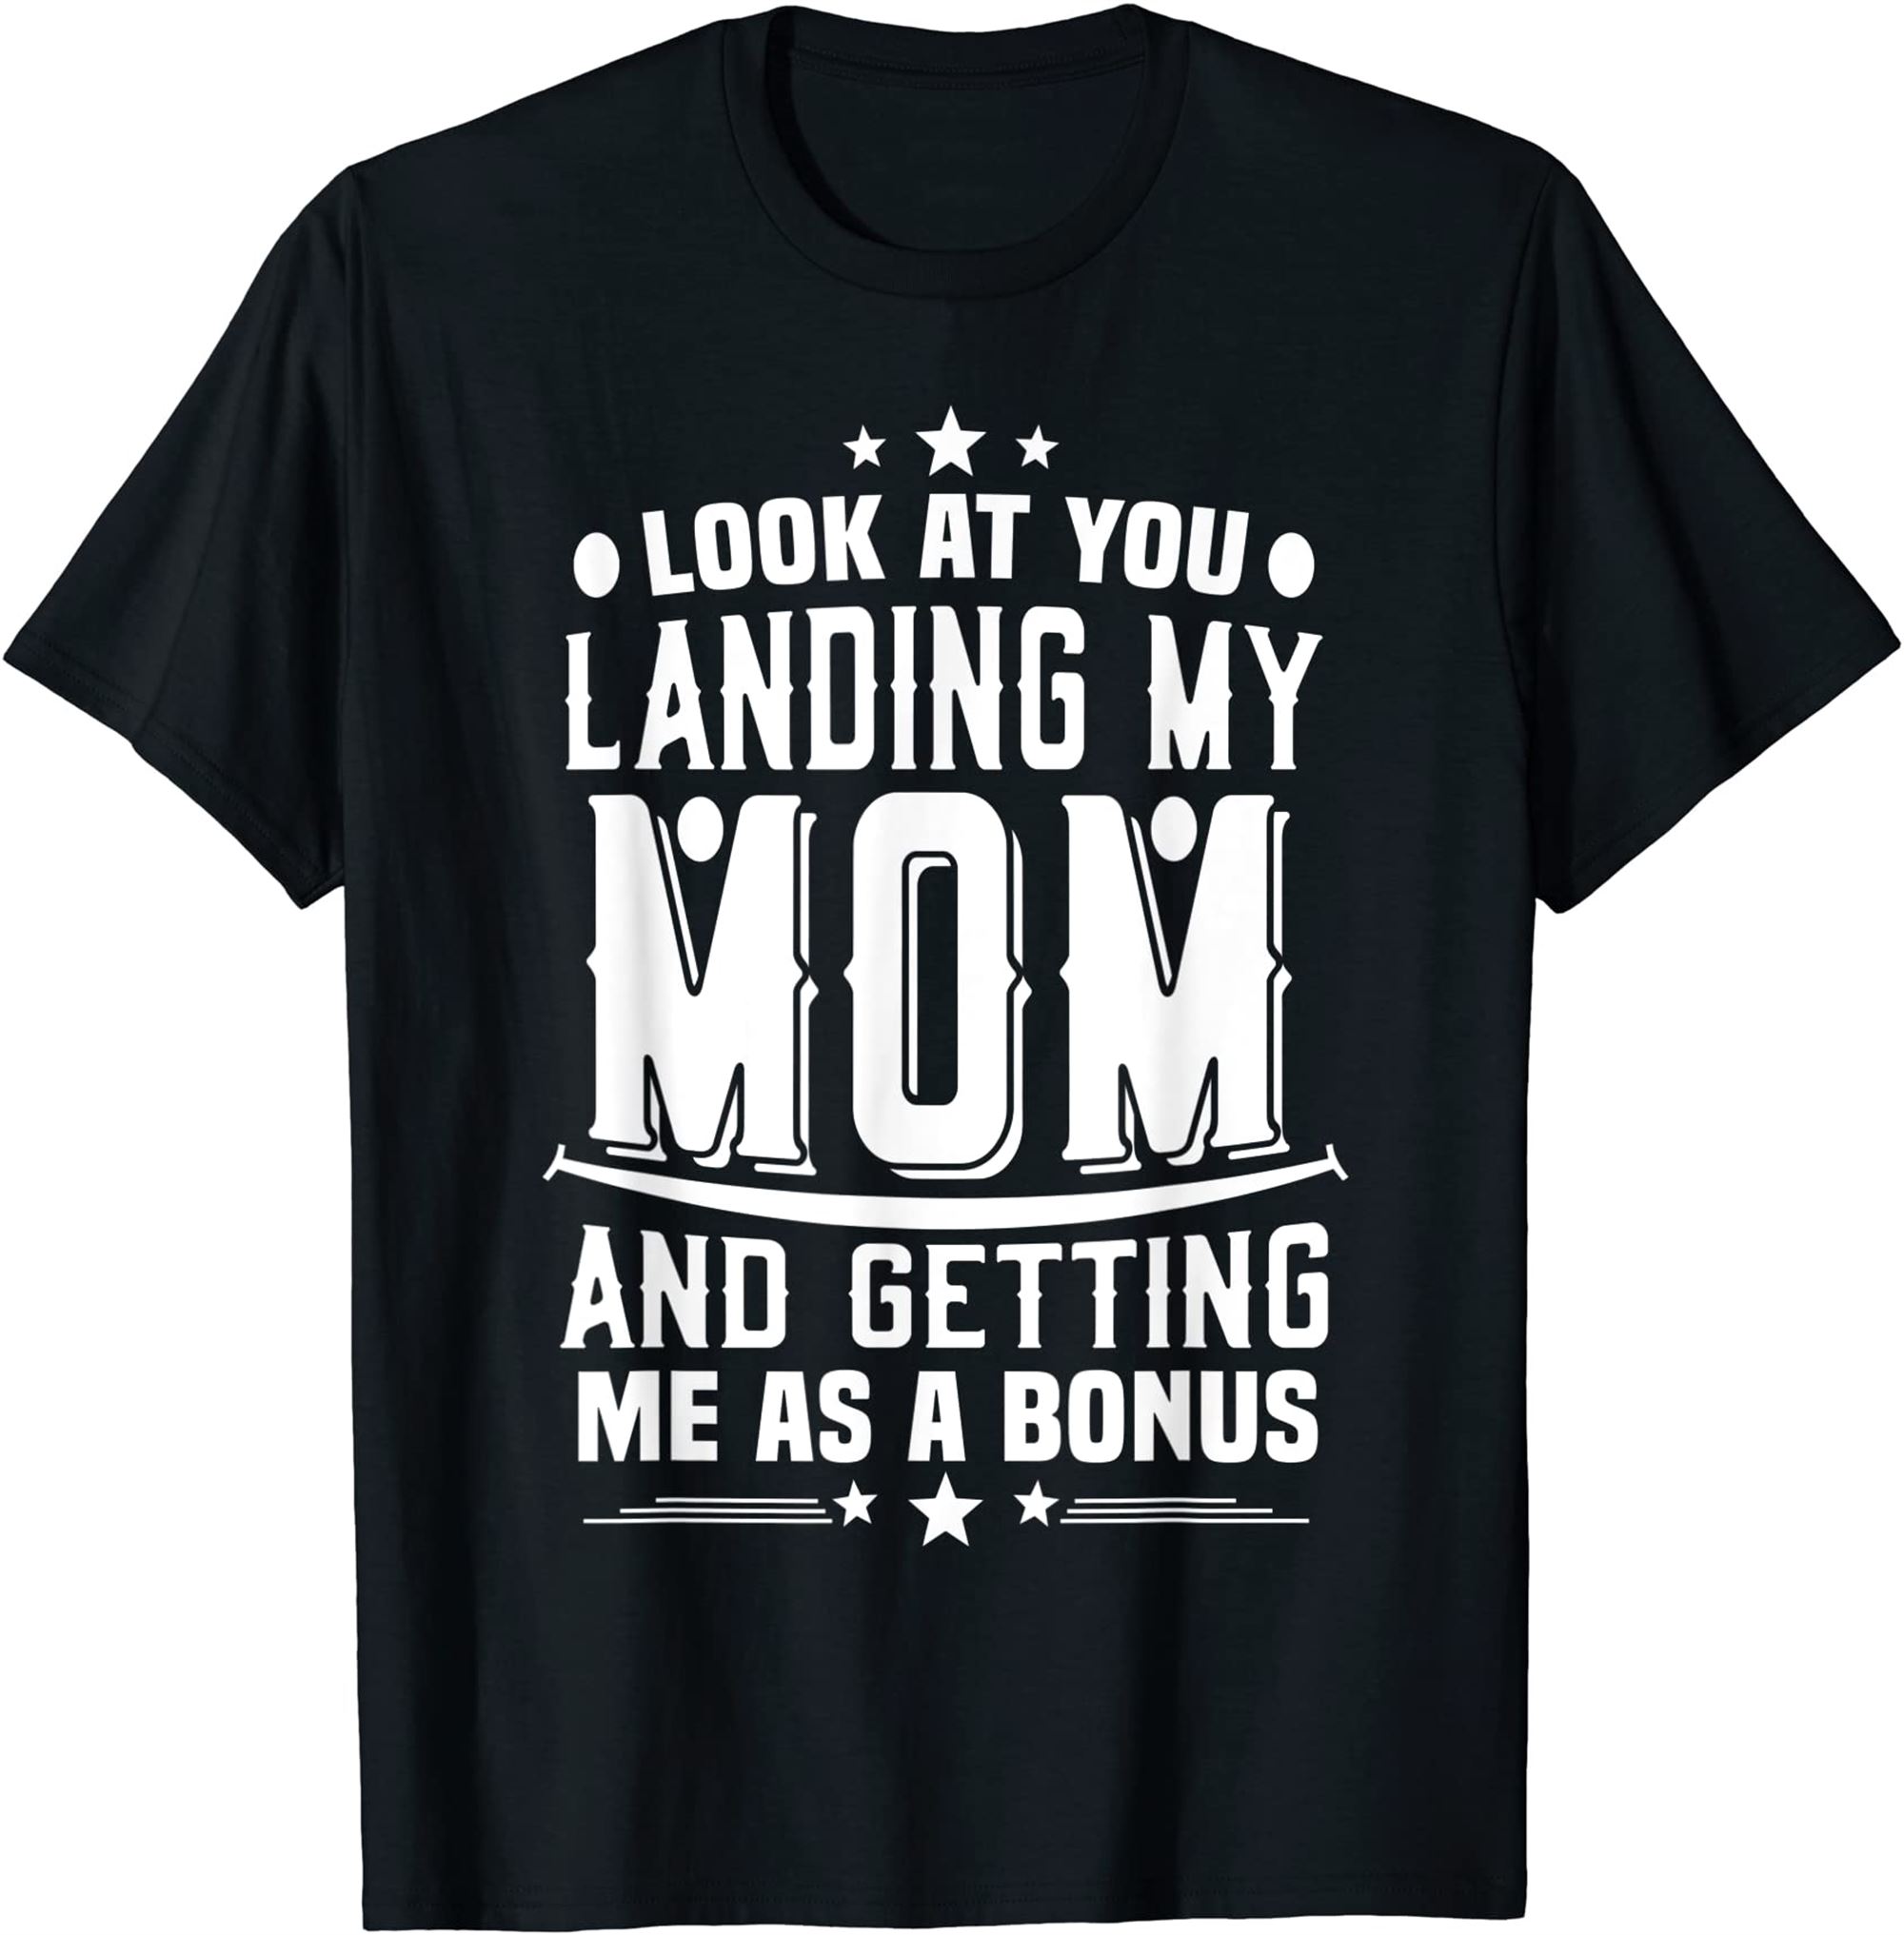 Look At You Landing My Mom Getting Me As A Bonus Funny Dad T-shirt Full Size Up To 5xl